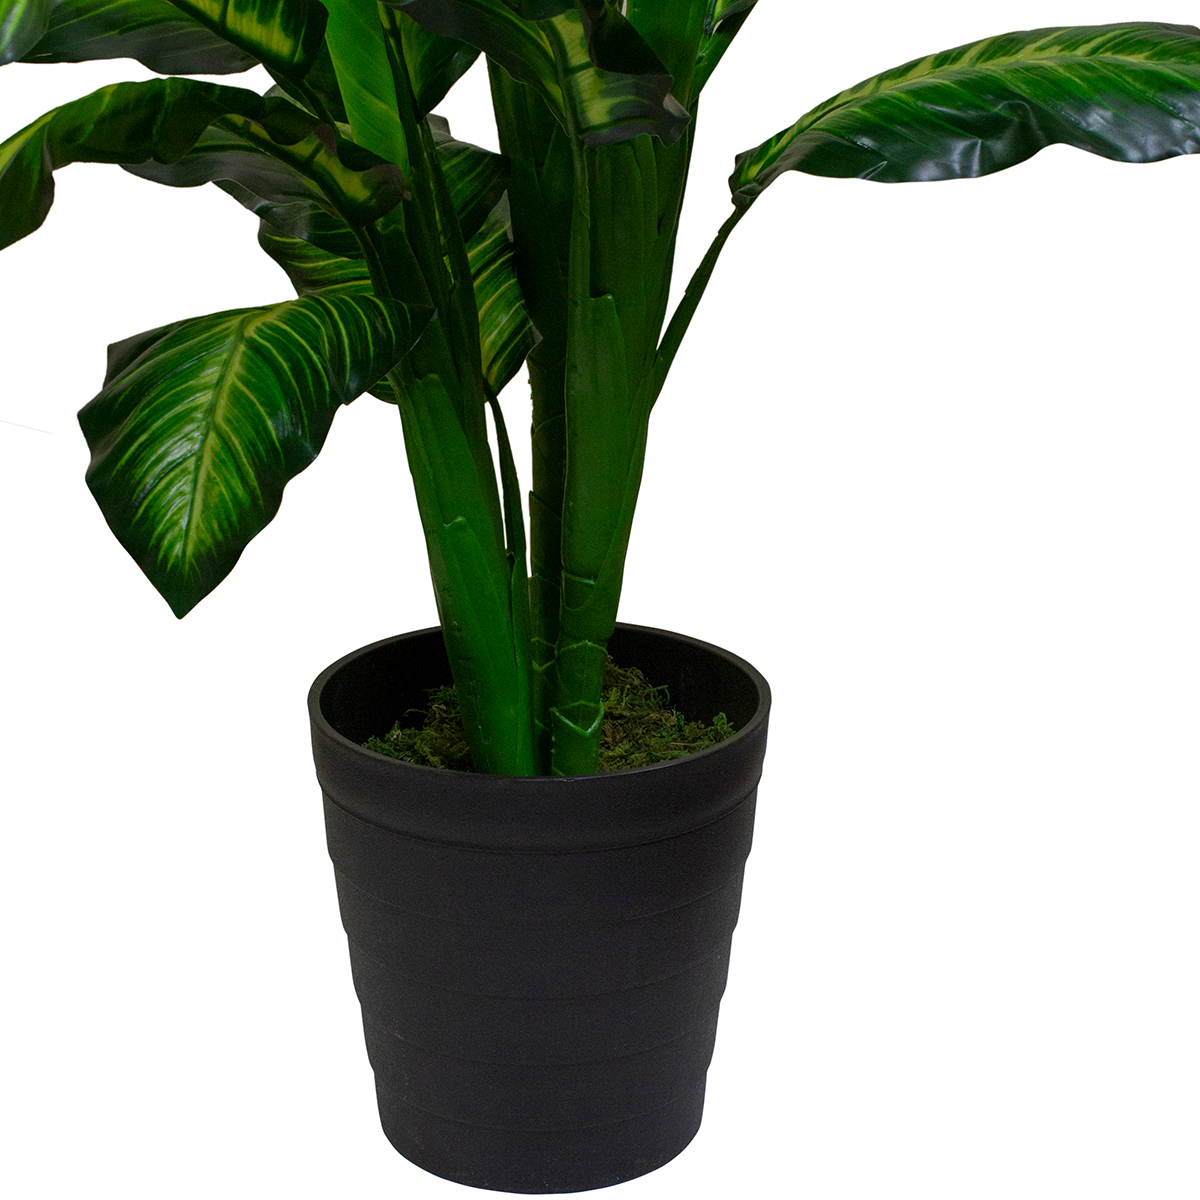 Northlight Seasonal 50in. Artificial Dieffenbachia Potted Plant